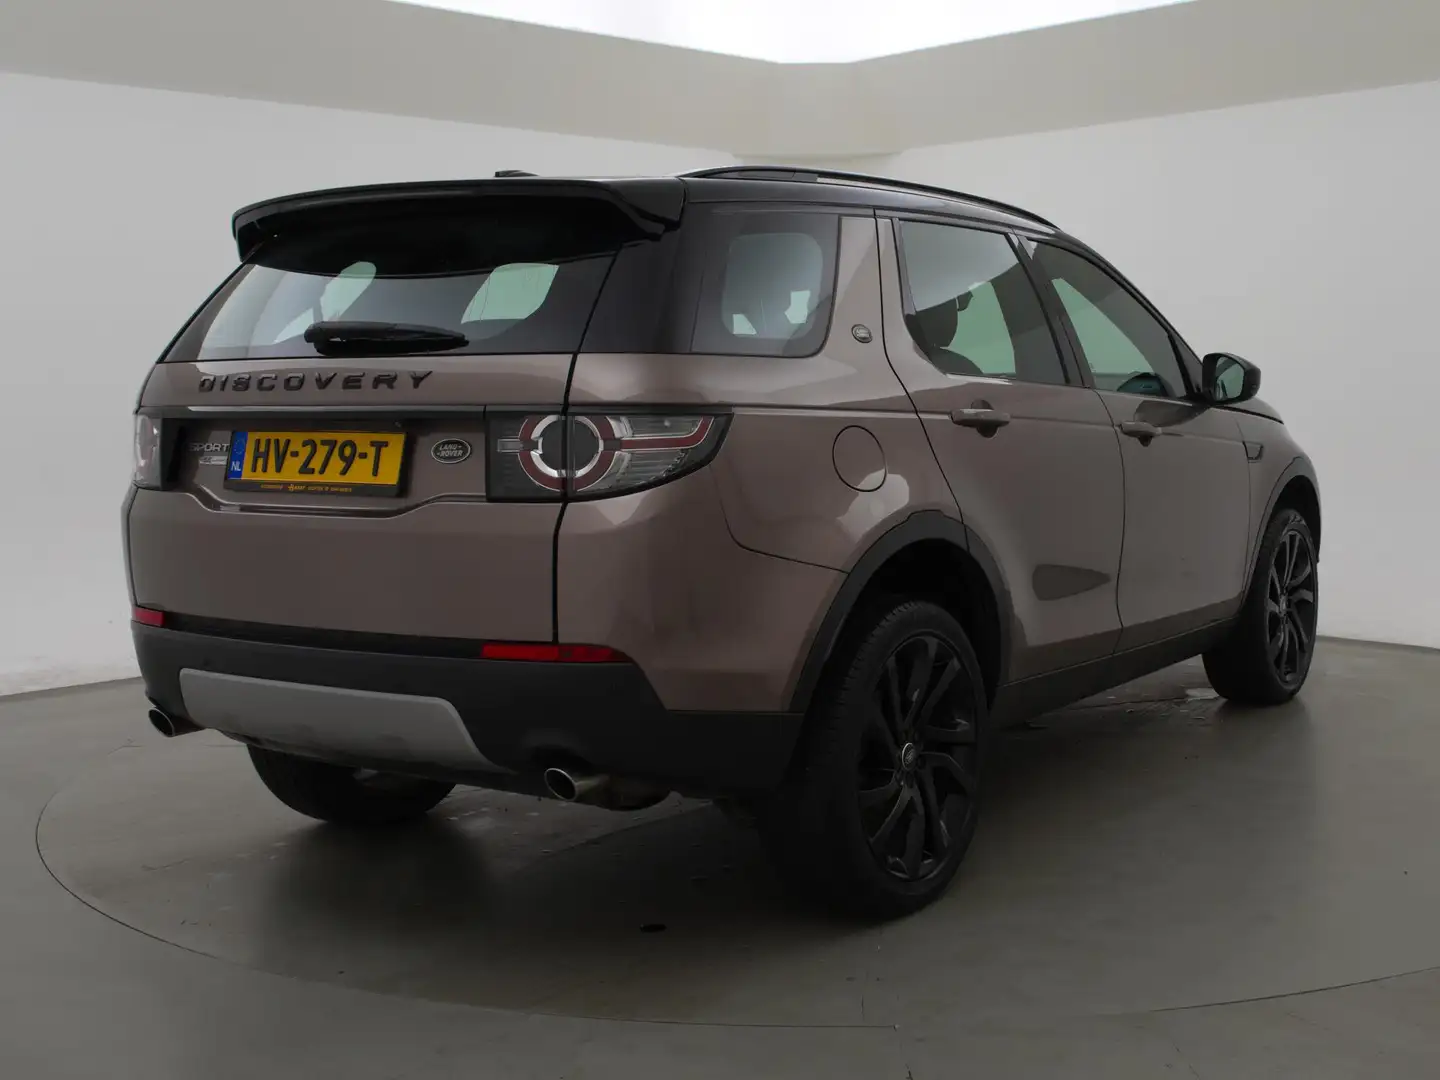 Land Rover Discovery Sport 2.0 Si4 240 PK 4WD AUT9 7-PERSOONS HSE LUXURY Brun - 2